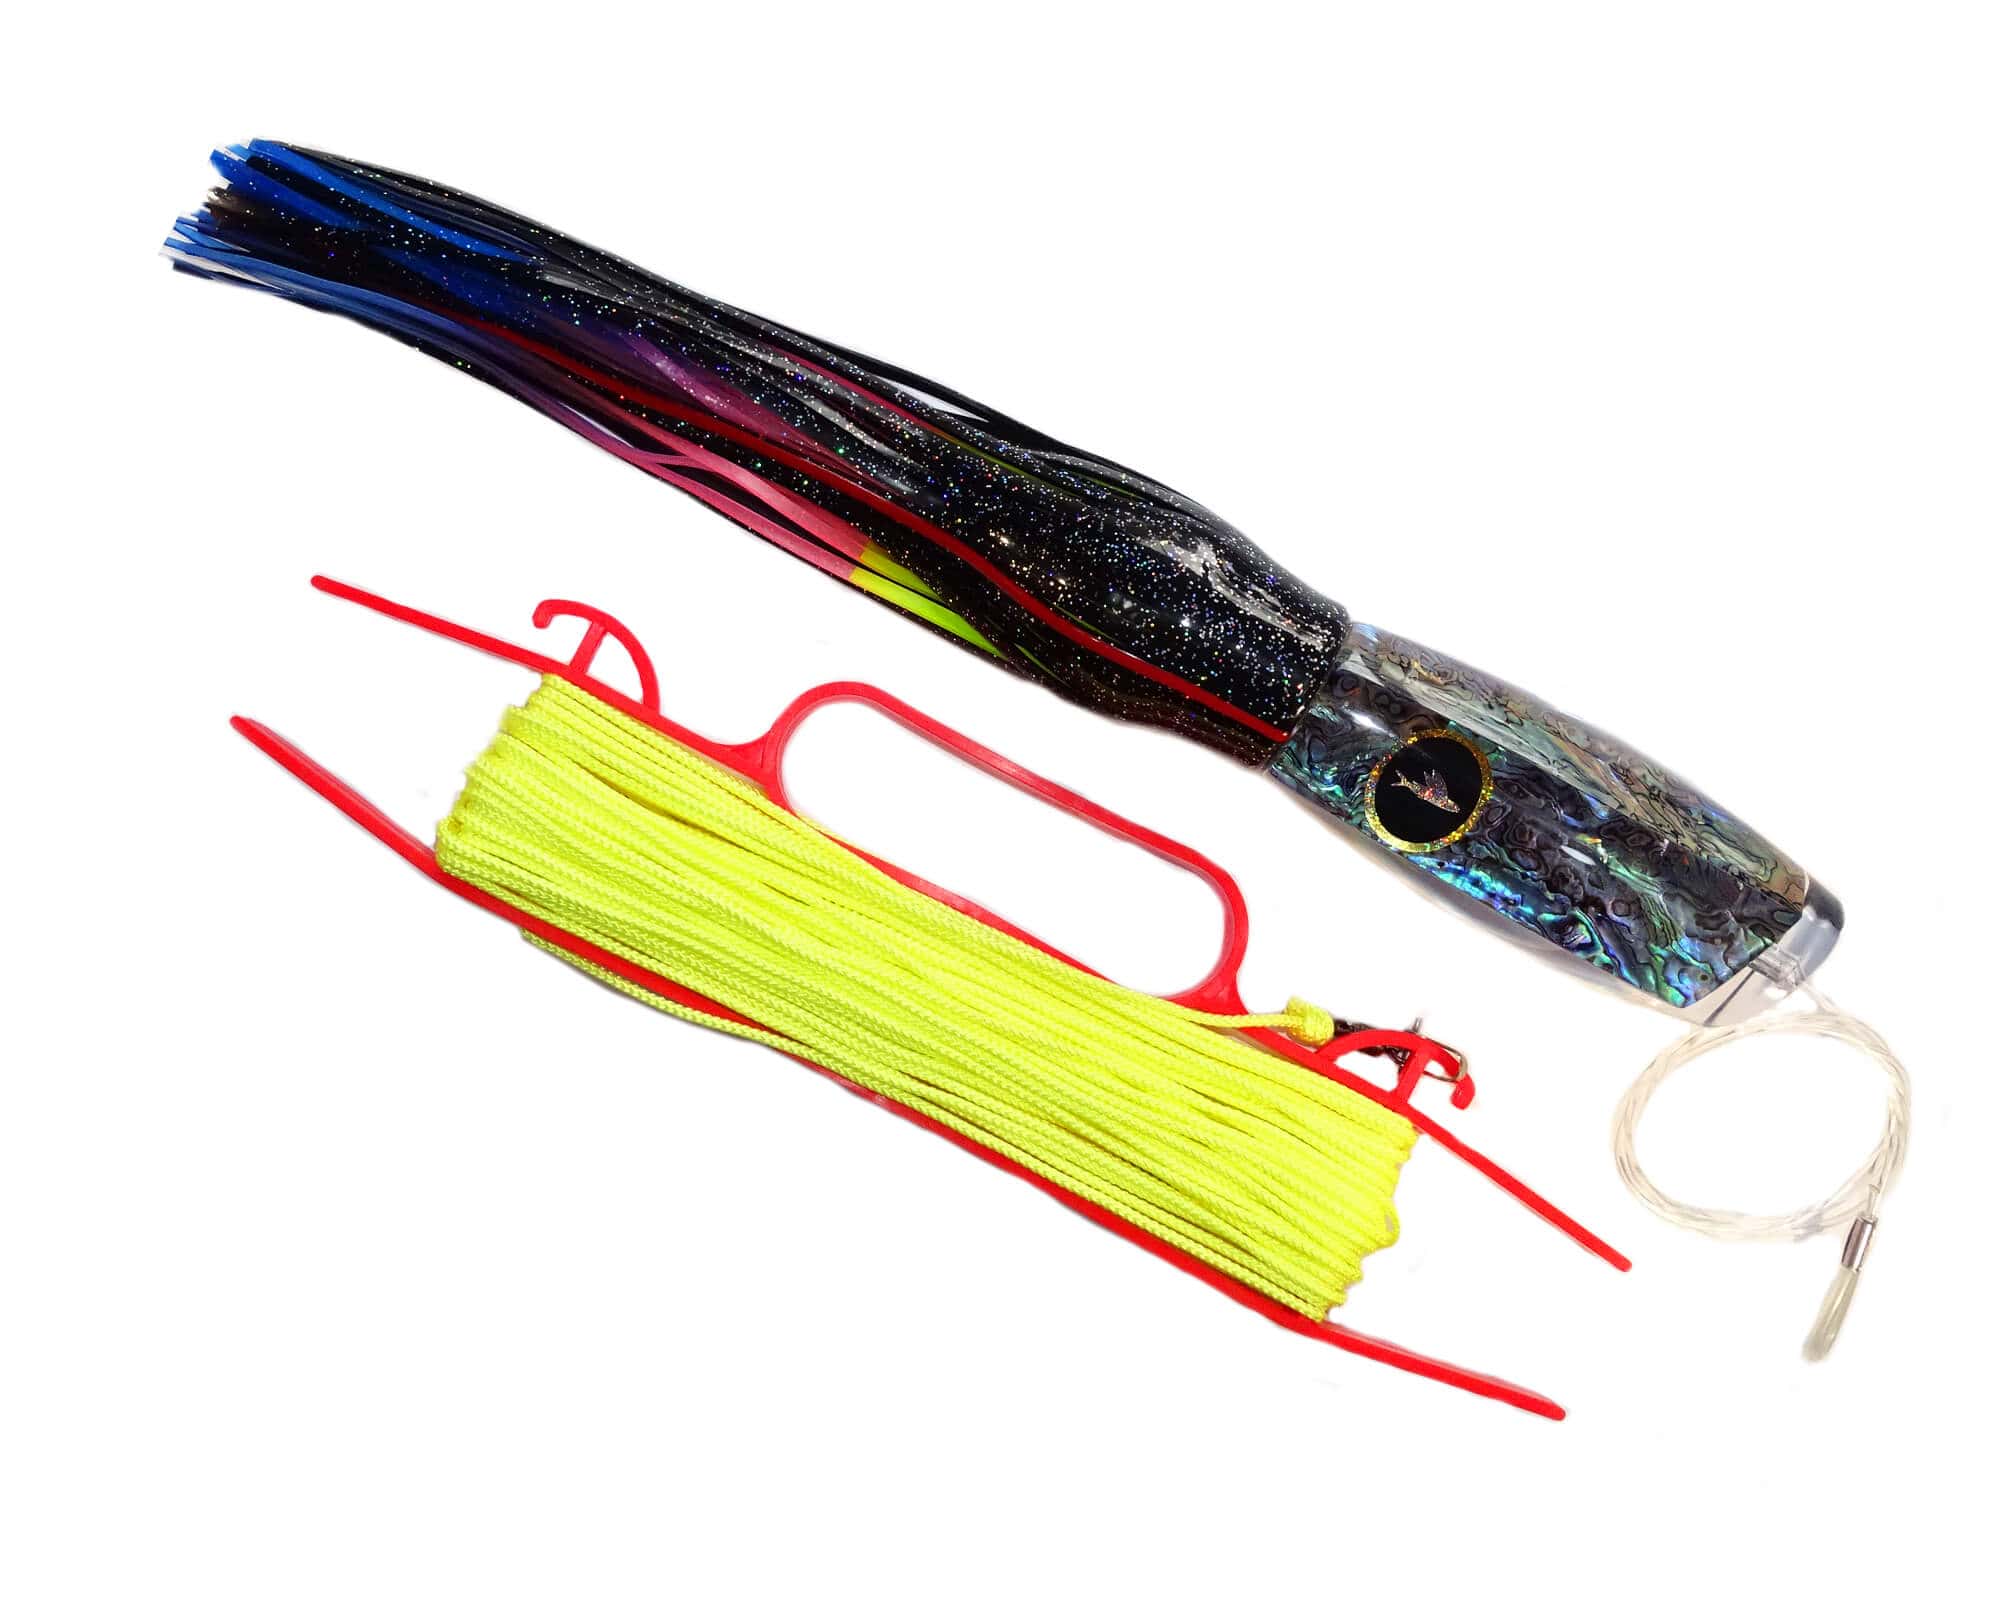 Santos Lures - Raptor Series - With Teaser Towline - Marlin Teasers